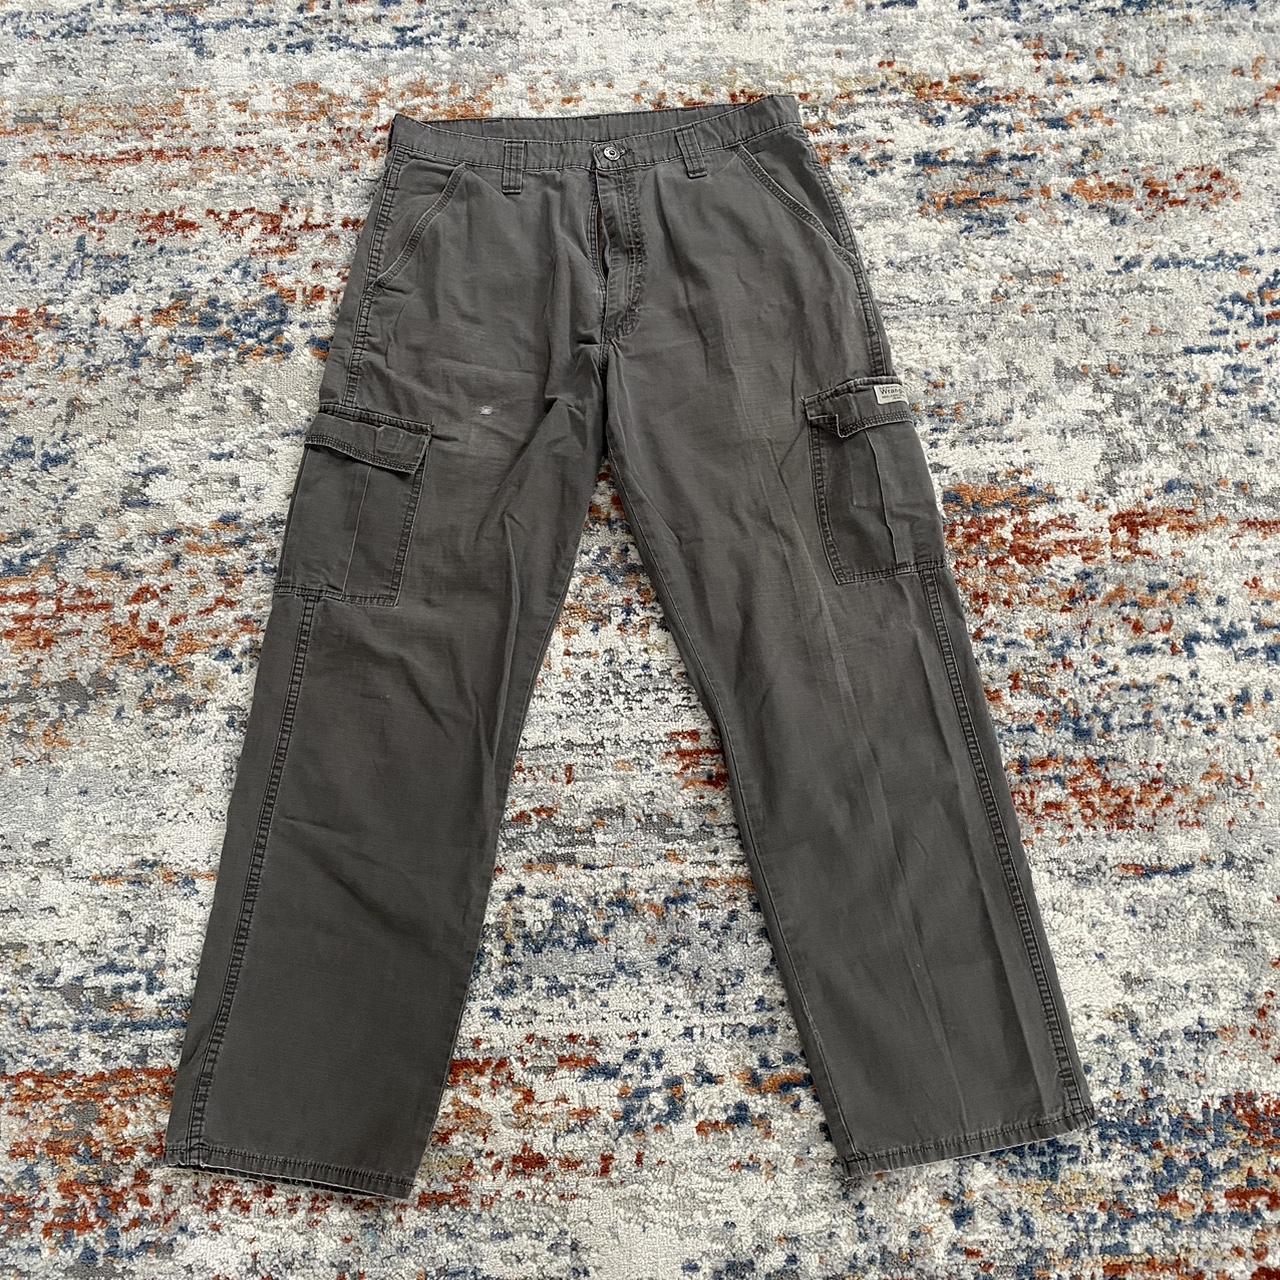 Brown/Grey Wranglers 34 x 32 Check pic for... - Depop